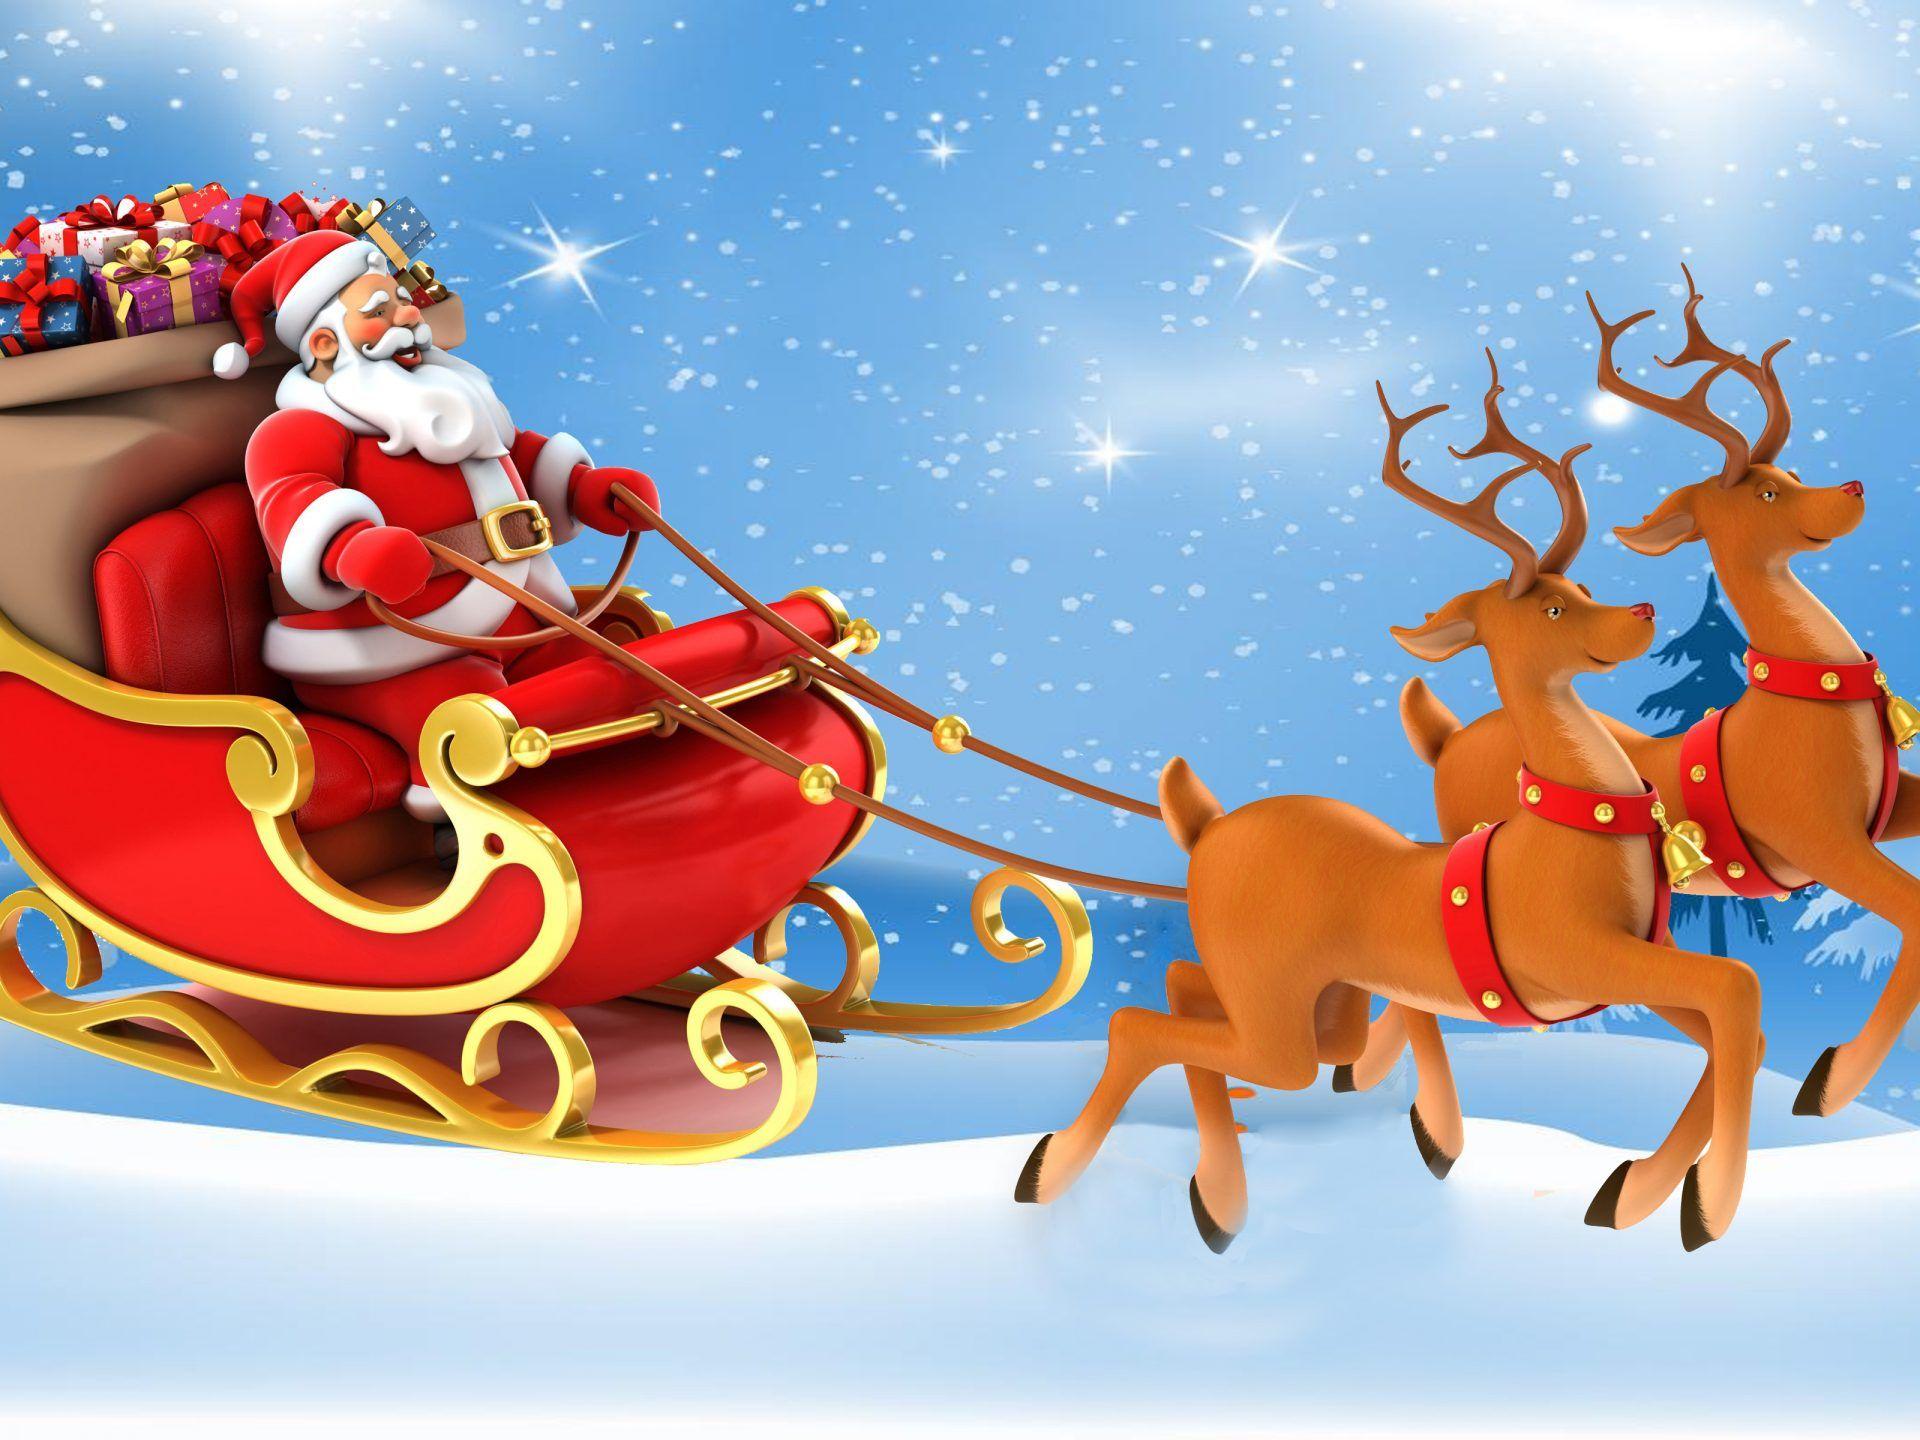 Christmas Postcard Santa Claus In A Sleigh With Gifts Reindeer